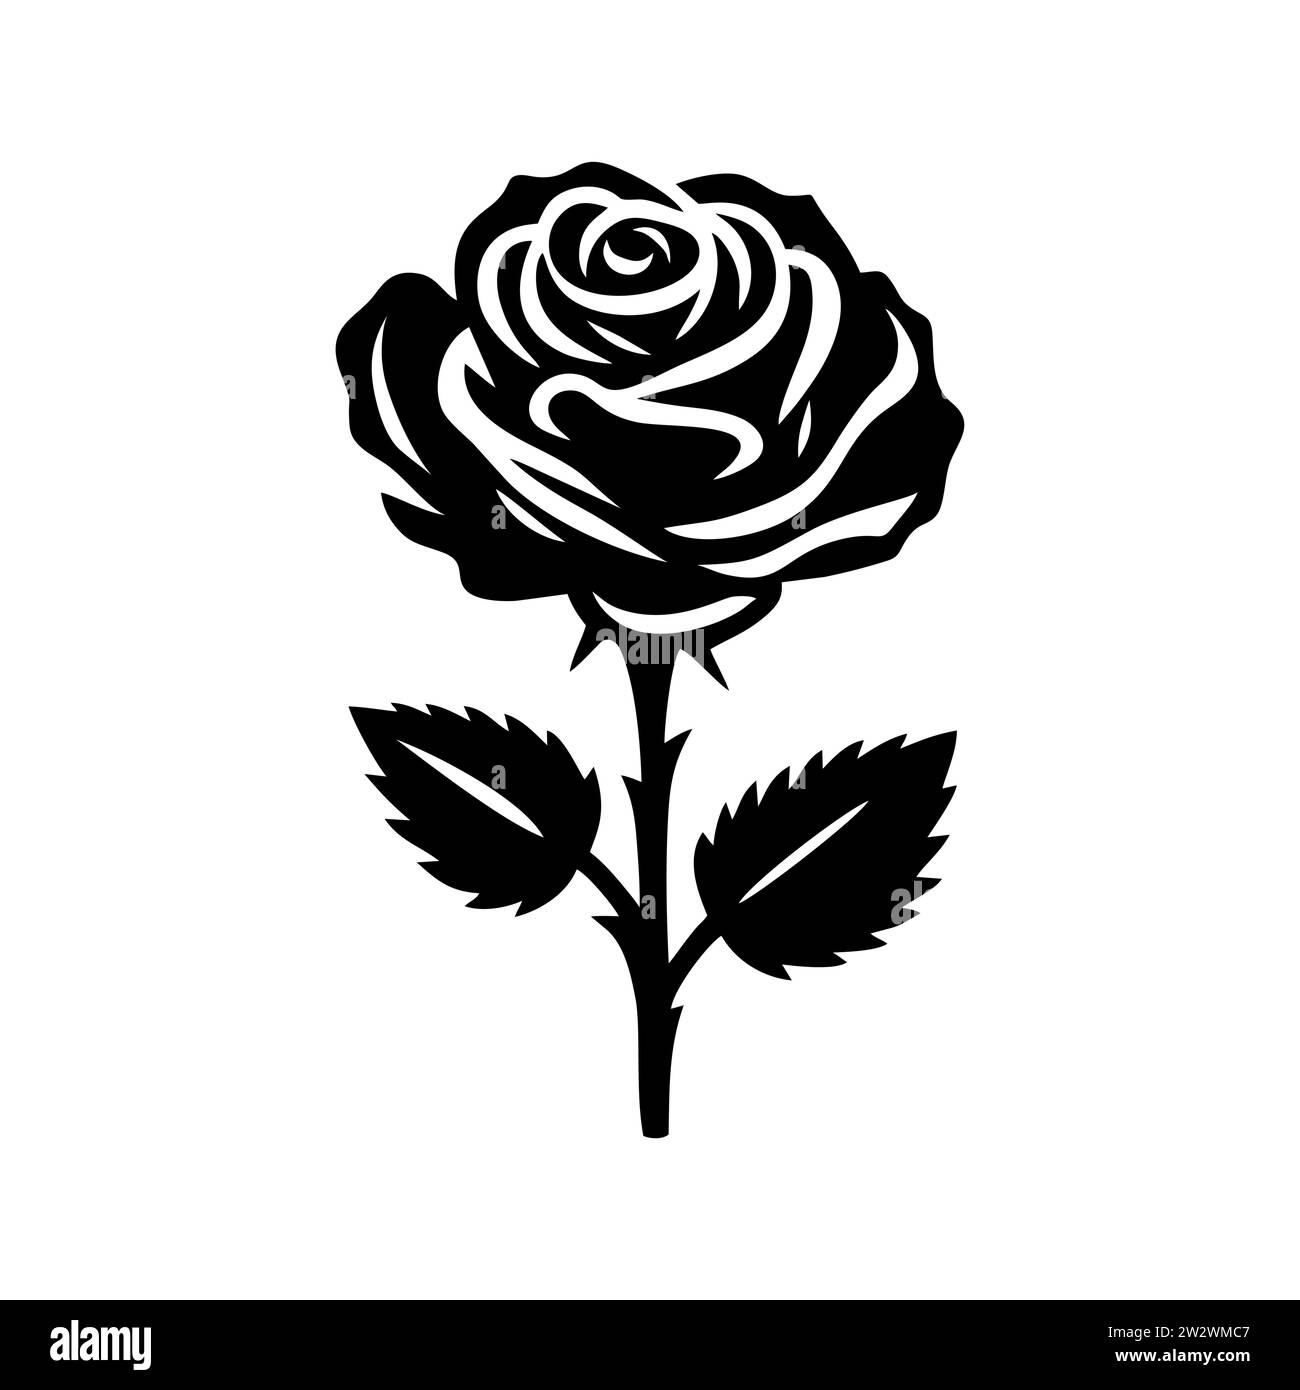 Black Silhouette Of Rose With Leaves Vector Illustration Stock